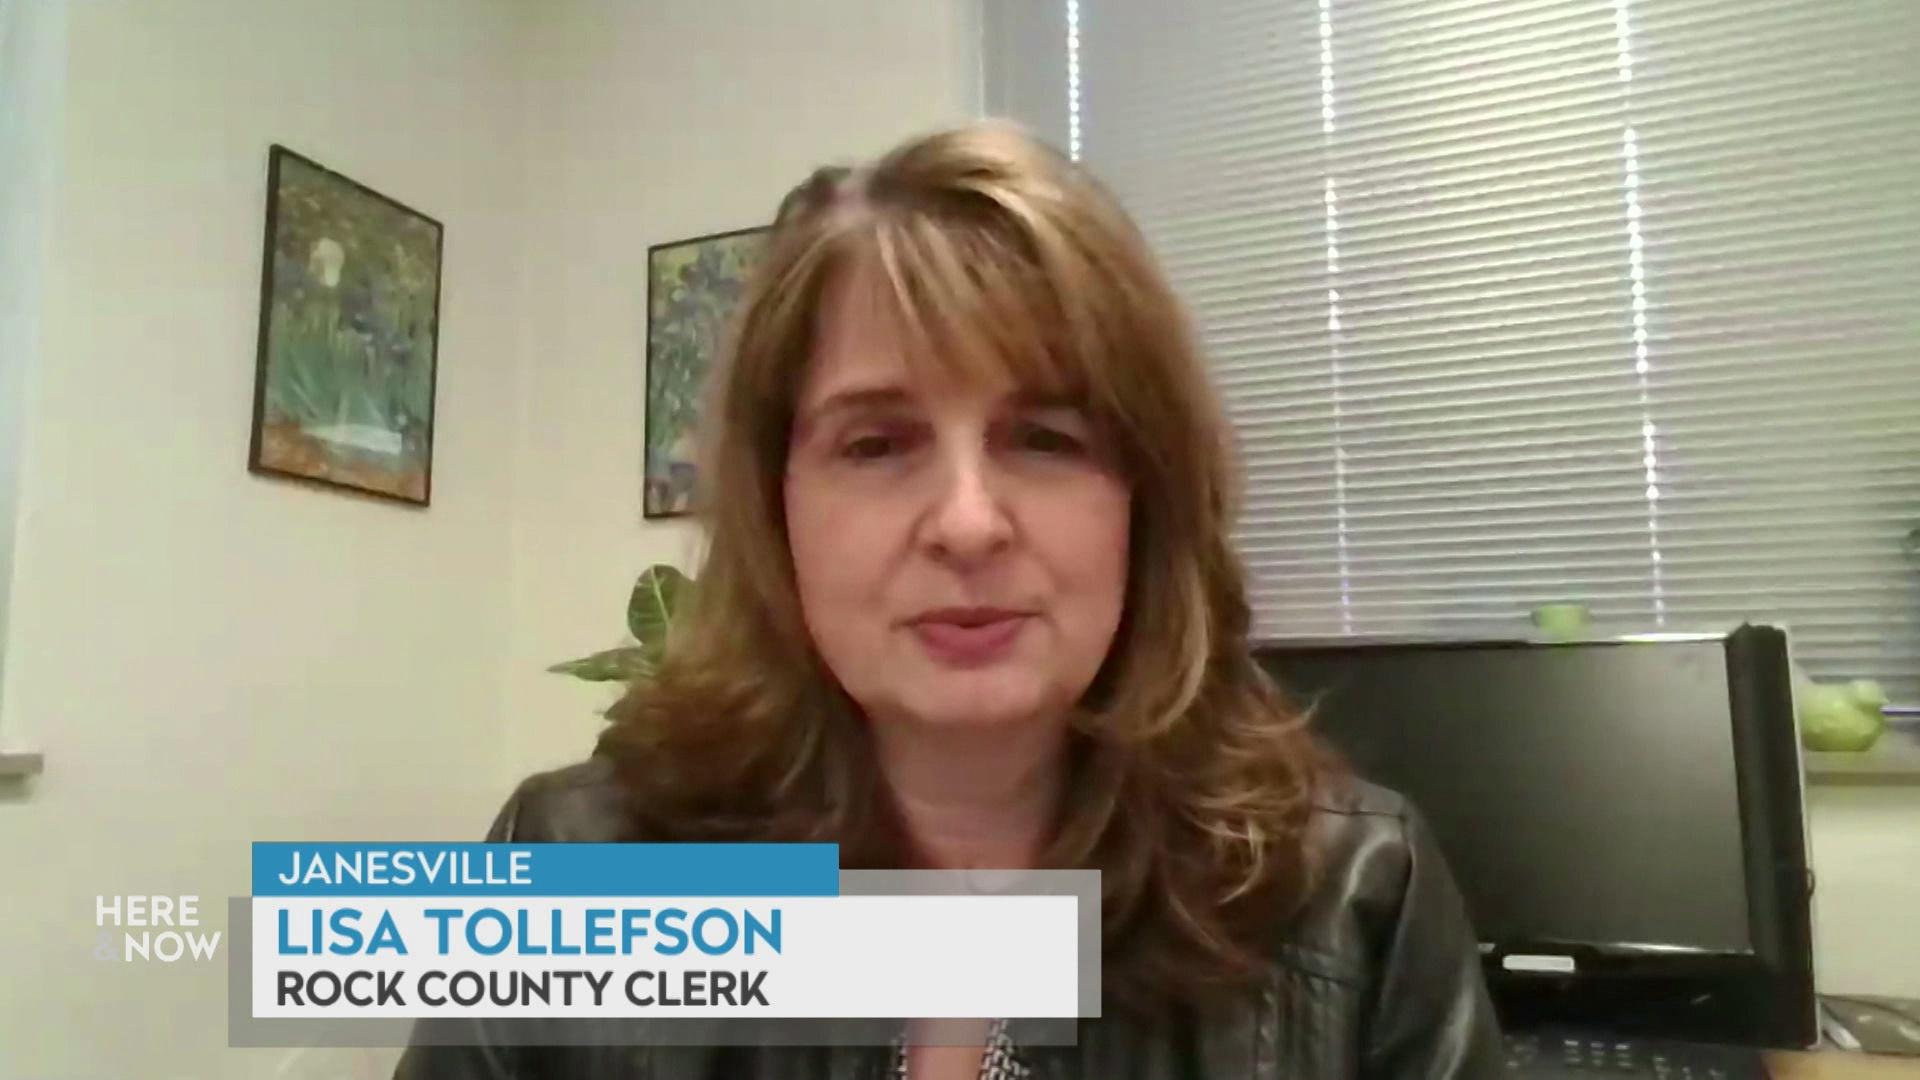 A still image from a video shows Lisa Tollefson seated in front of a window with blinds and framed poster with a graphic at bottom reading 'Janesville,' 'Lisa Tollefson' and 'Rock County Clerk.'